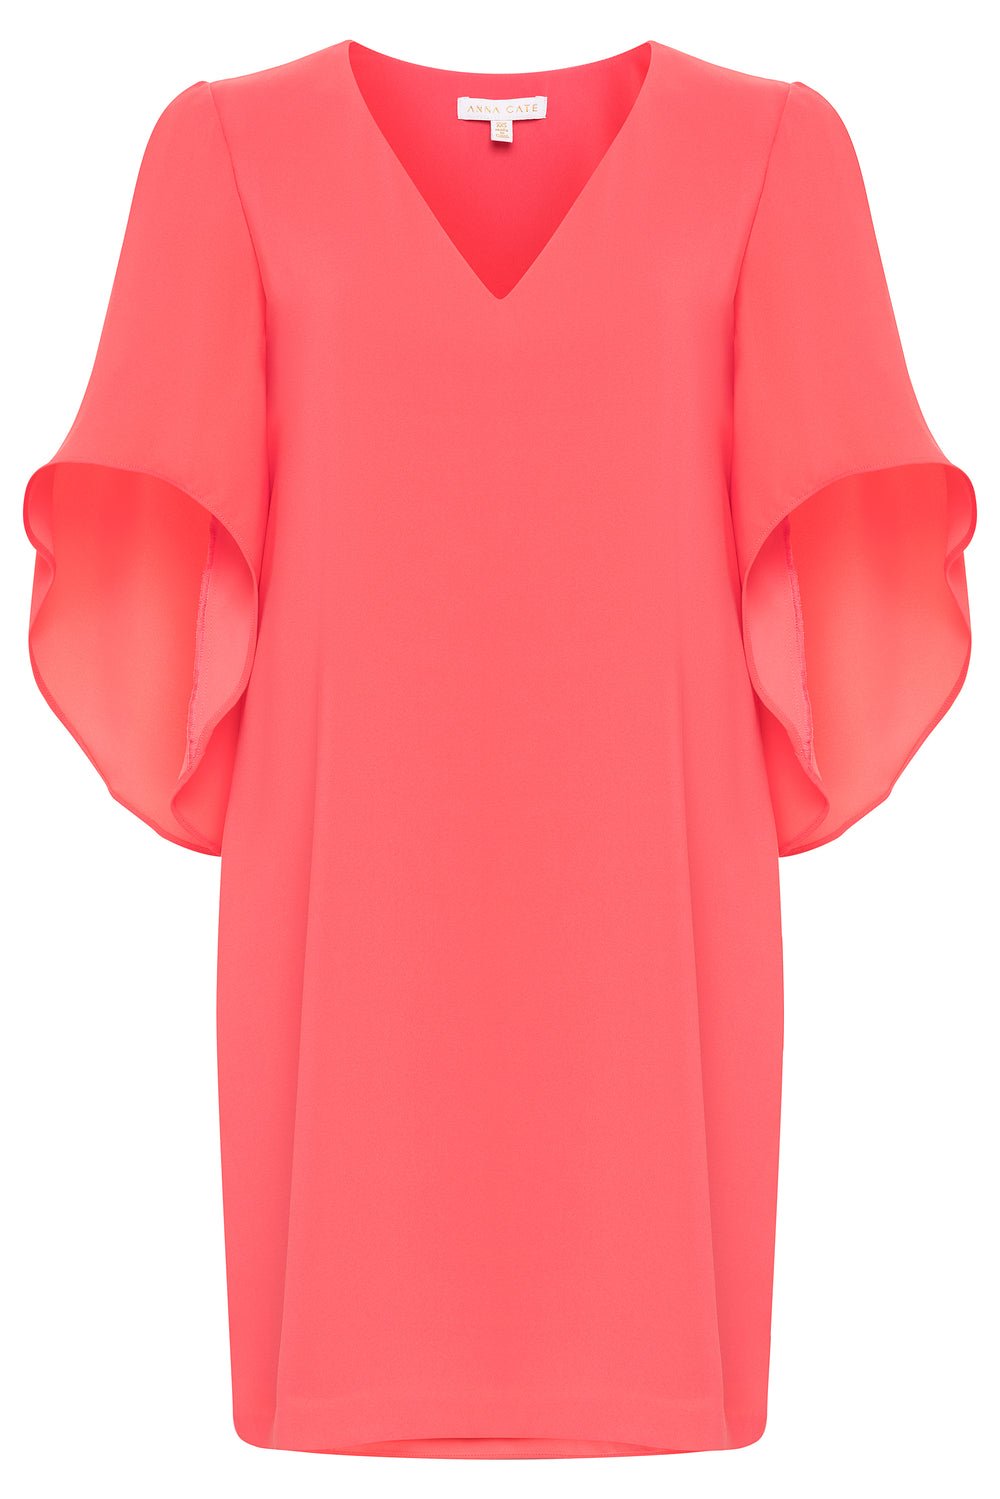 Anna Cate - Meredith S/S Dress - Fusion Coral - Shorely Chic Boutique